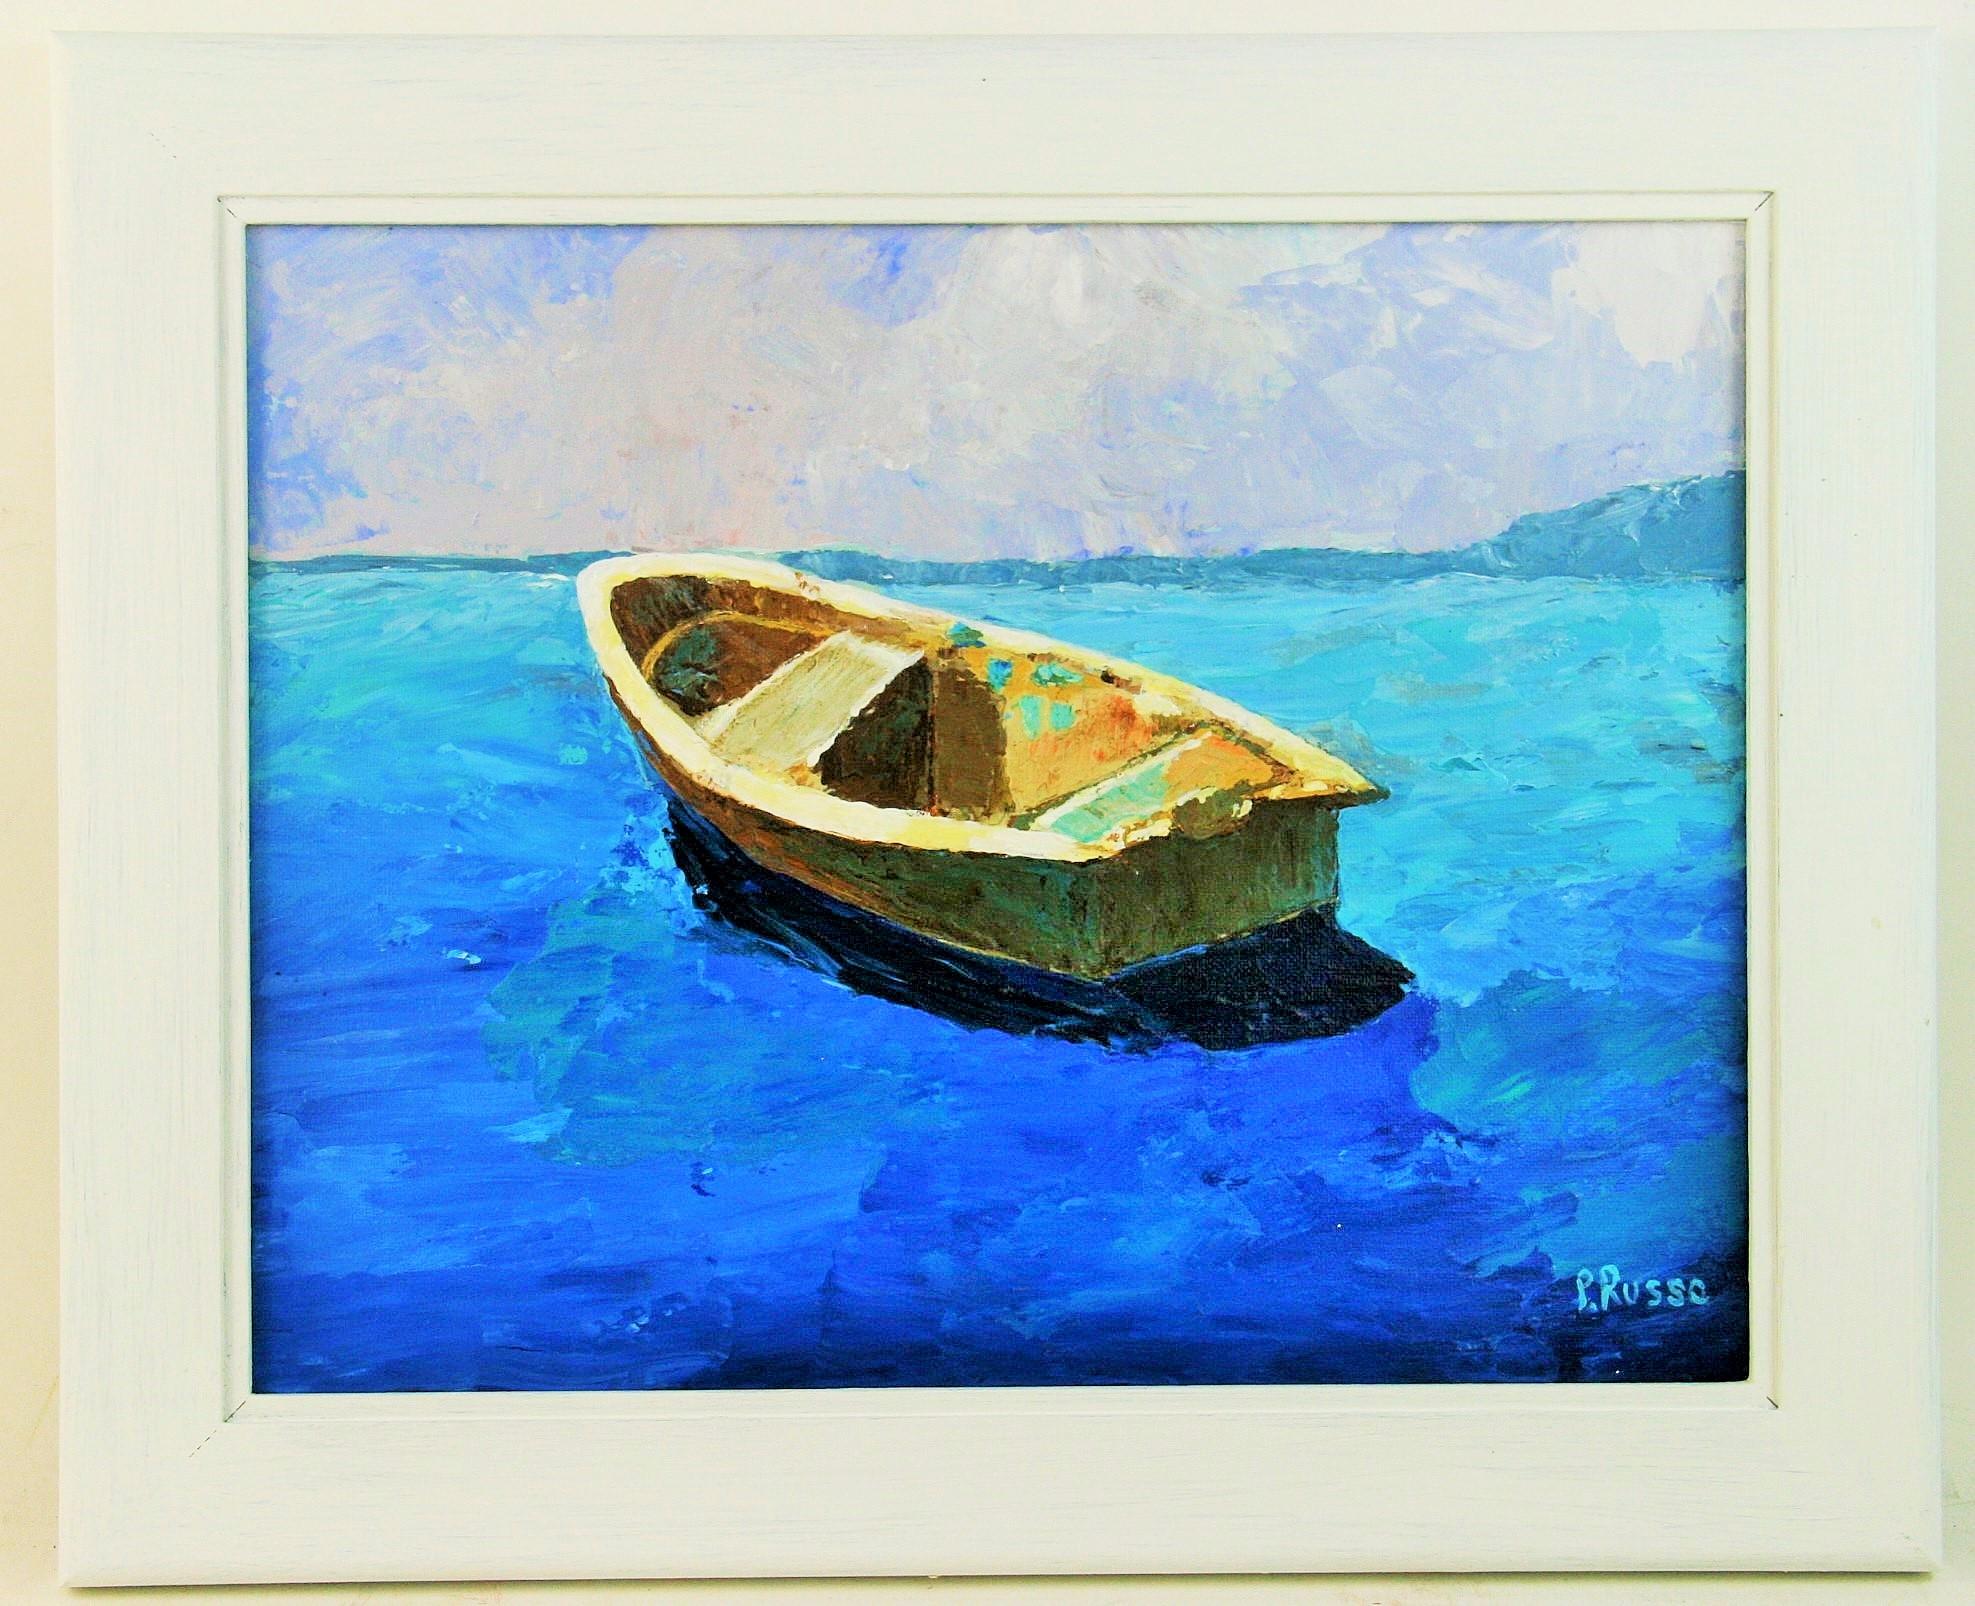 Cerulean Blue Seascape - Painting by P. Russo